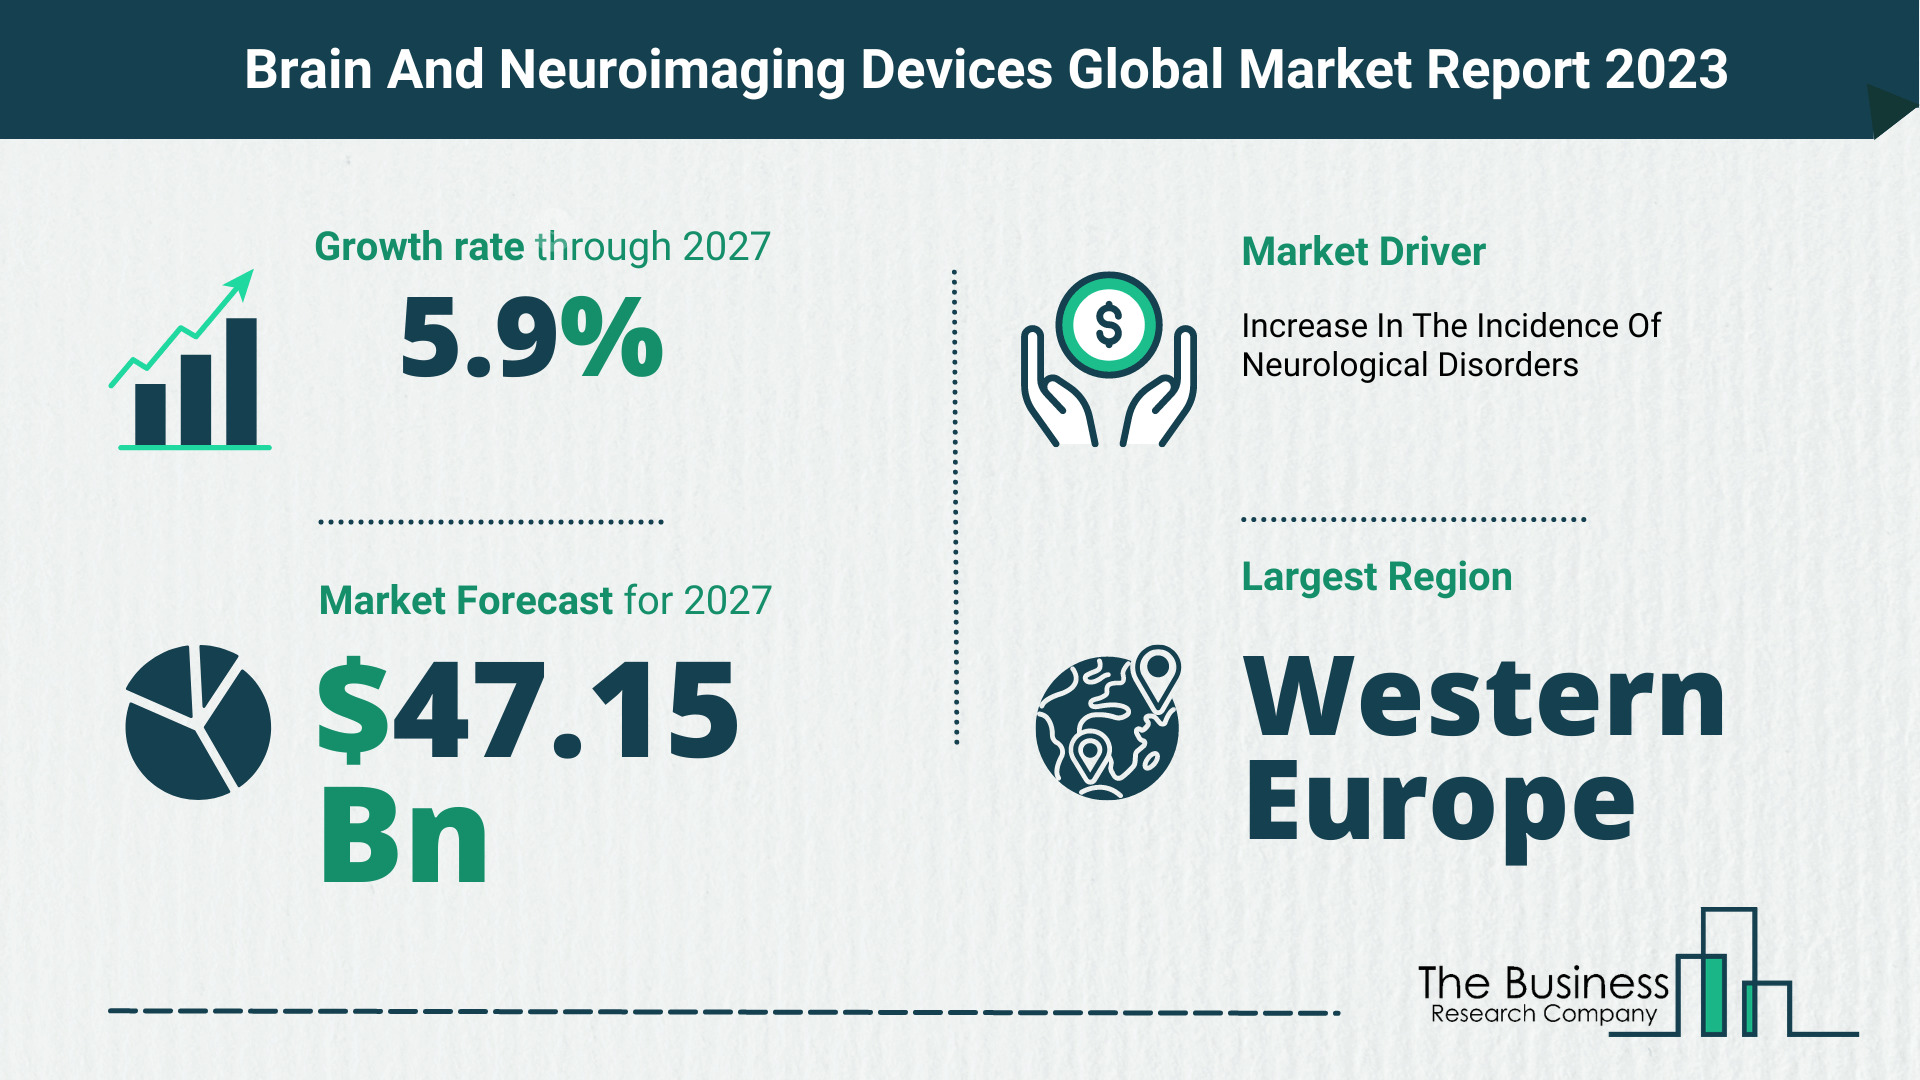 How Will The Brain And Neuroimaging Devices Market Globally Expand In 2023?